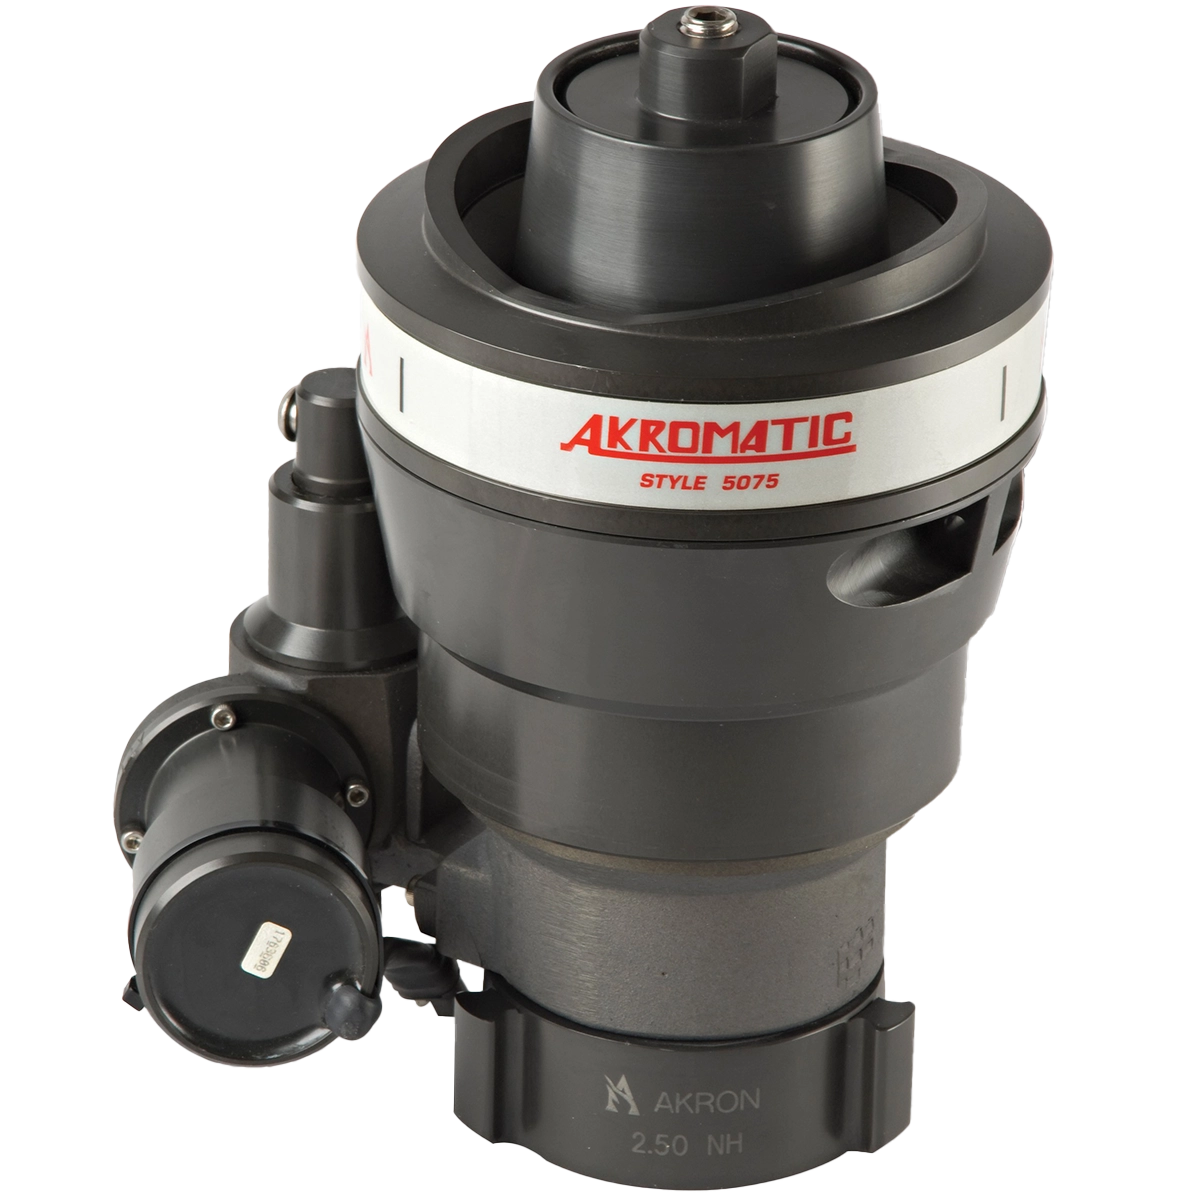 Akron Nozzle, Akromatic, 1250 Electric, 250-1250 GPM 